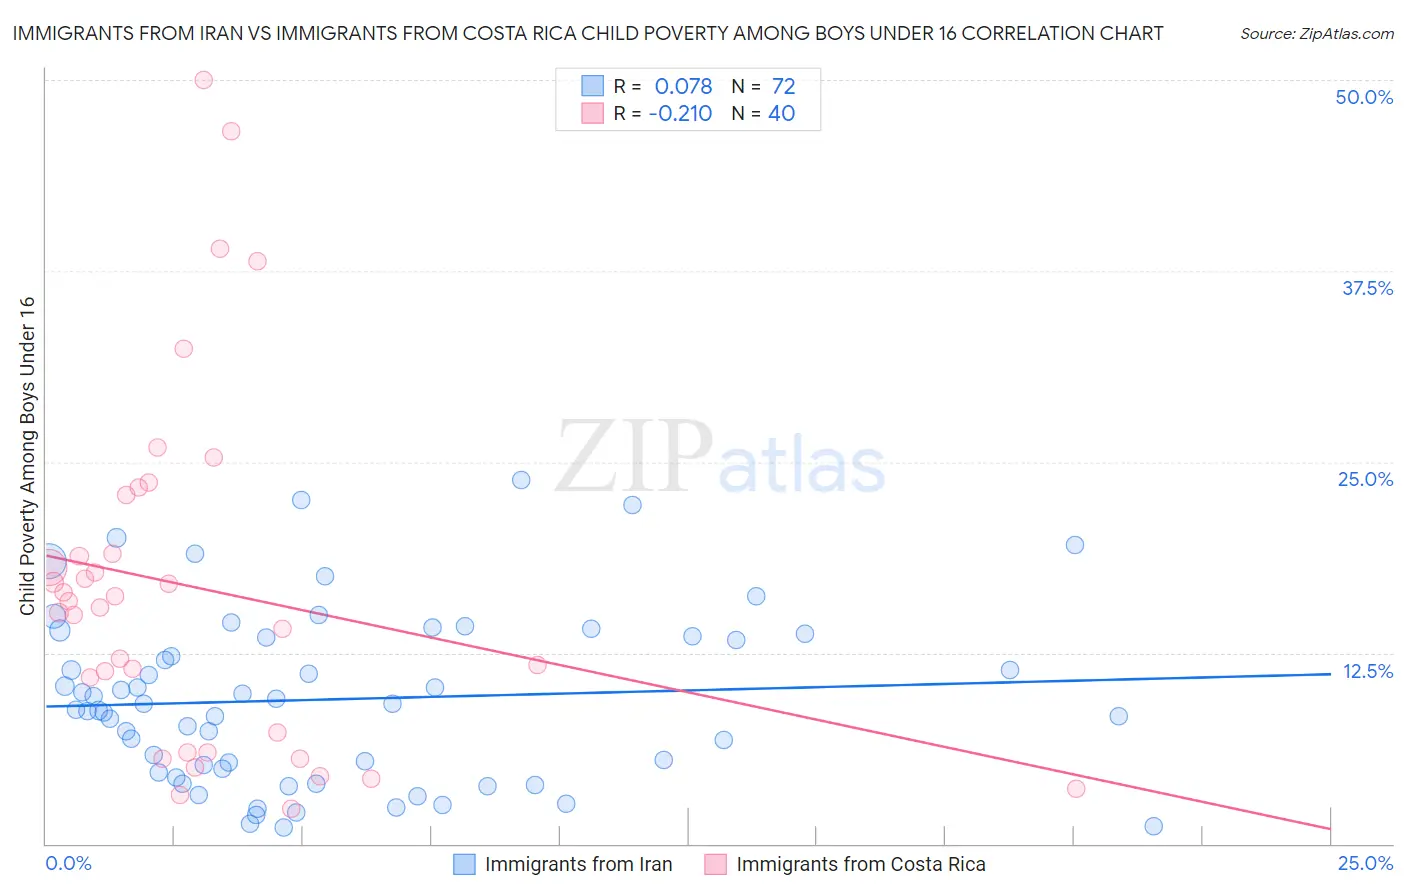 Immigrants from Iran vs Immigrants from Costa Rica Child Poverty Among Boys Under 16